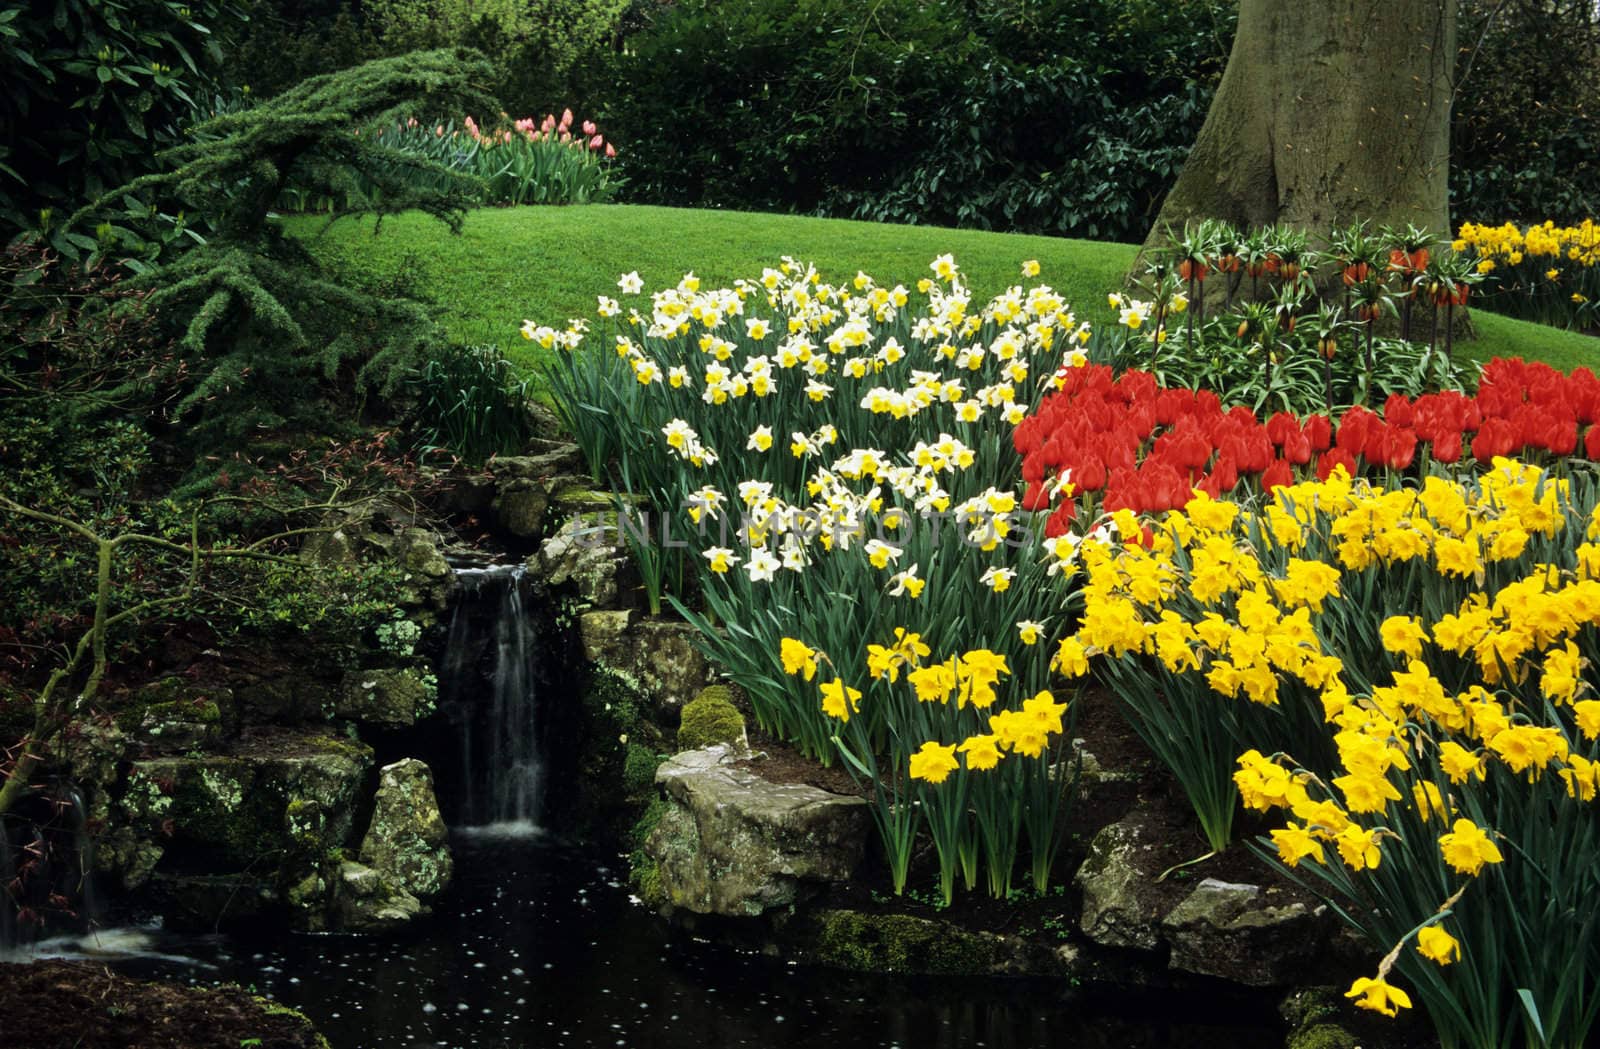 Awaterfall is surrounded by spring tulips and daffodils in Keukenhof Gardens, Lisse, The Netherlands.